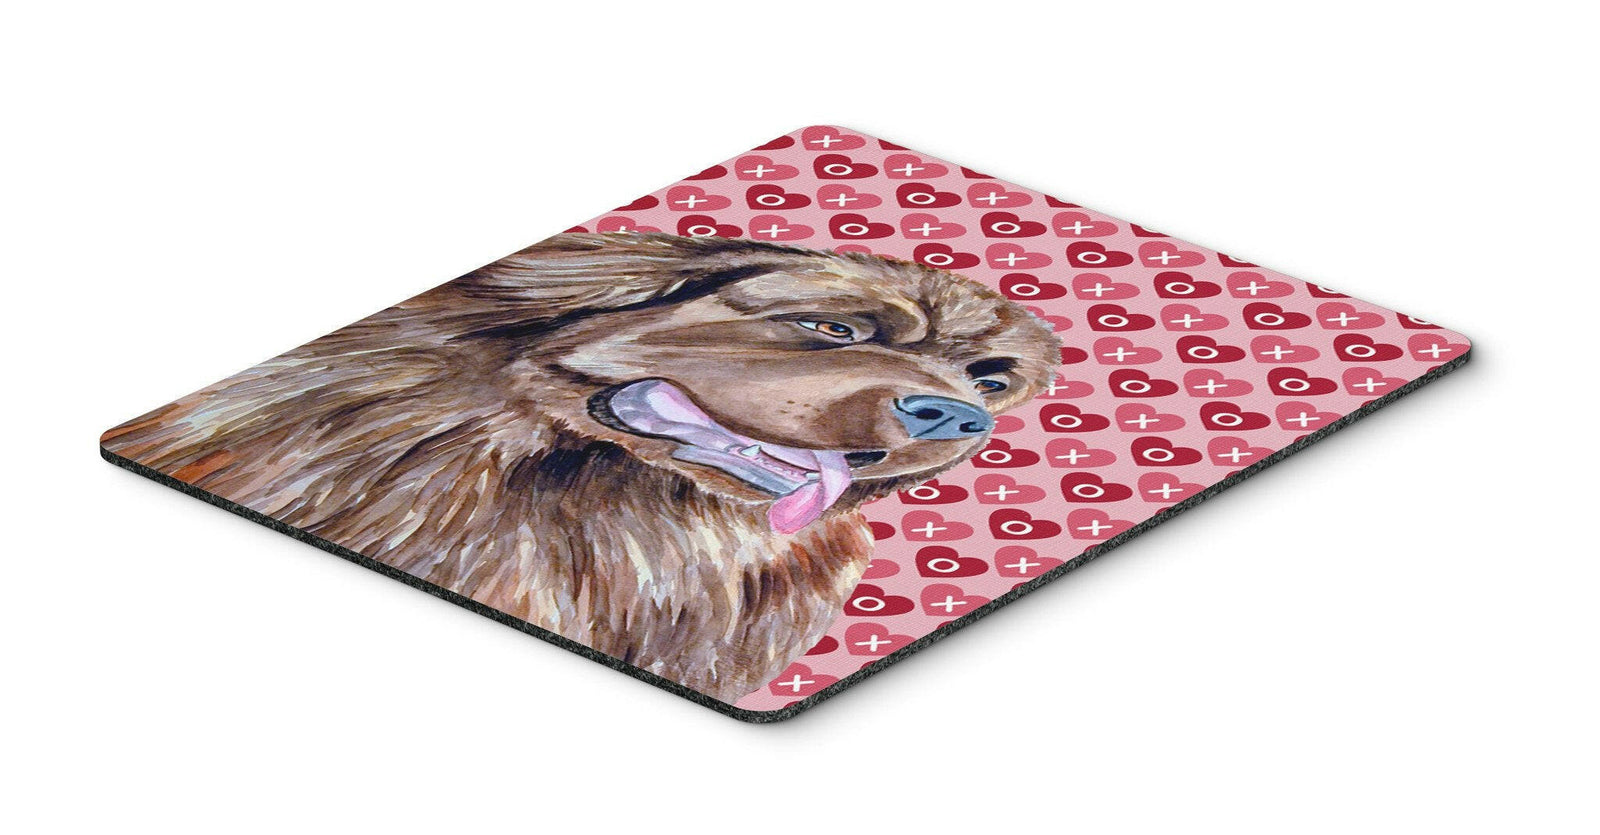 Newfoundland Hearts Love and Valentine's Day Mouse Pad, Hot Pad or Trivet by Caroline's Treasures